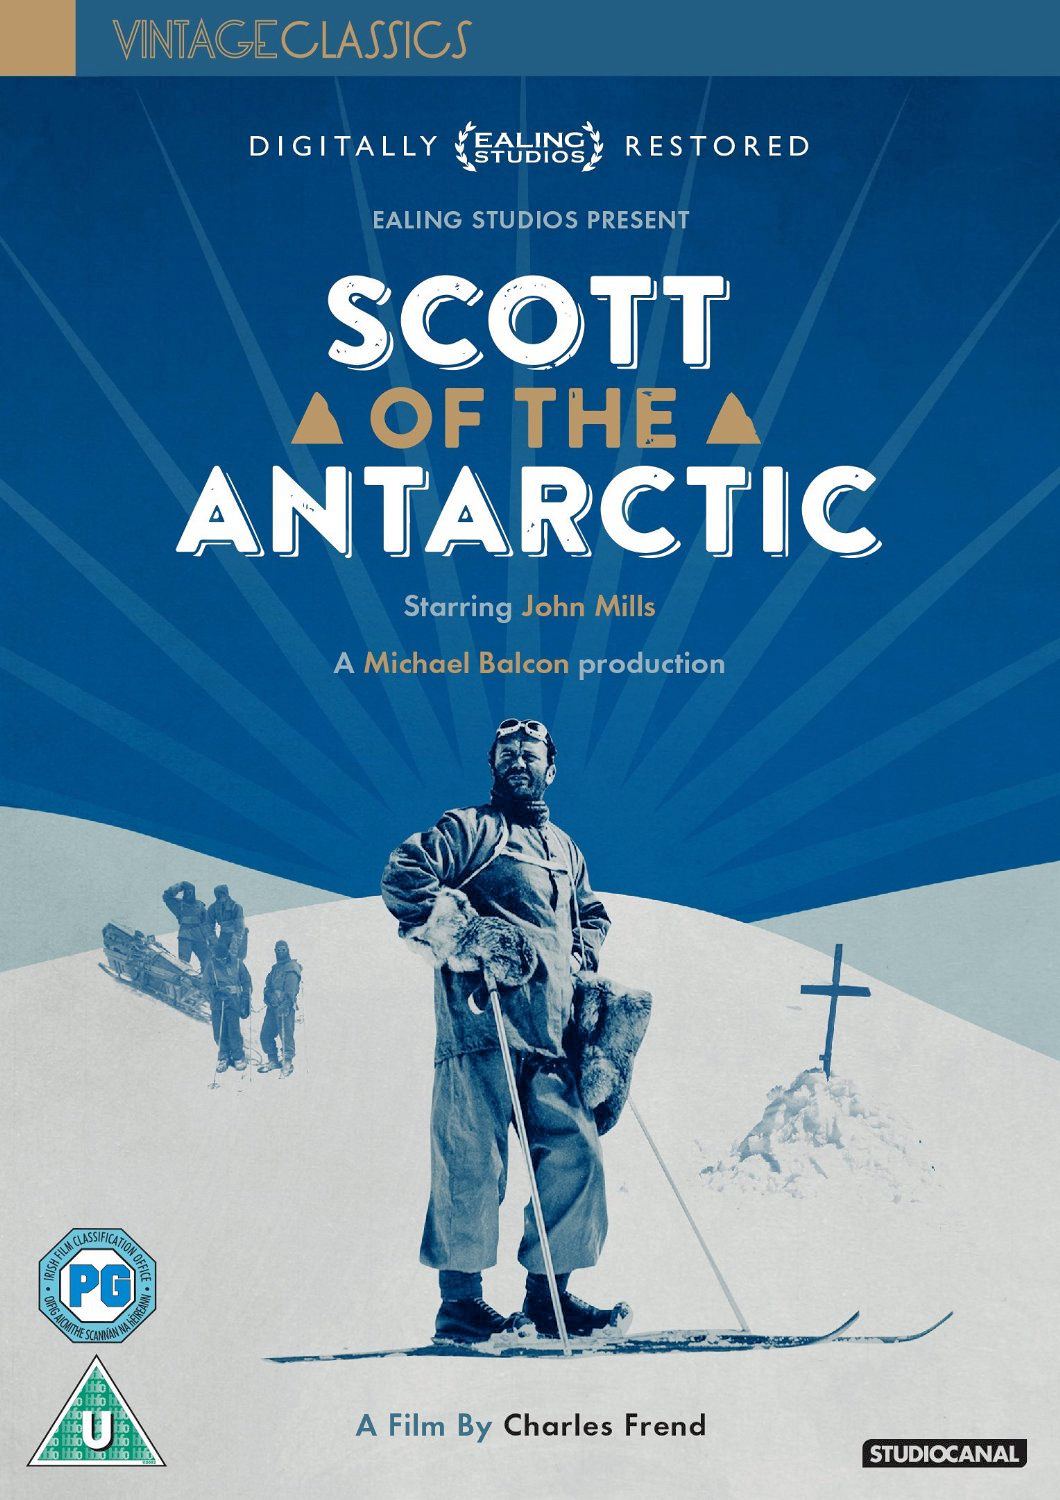 Scott of the Antarctic DVD from Studiocanal and Vintage Classics.  Features John Mills as Captain Scott